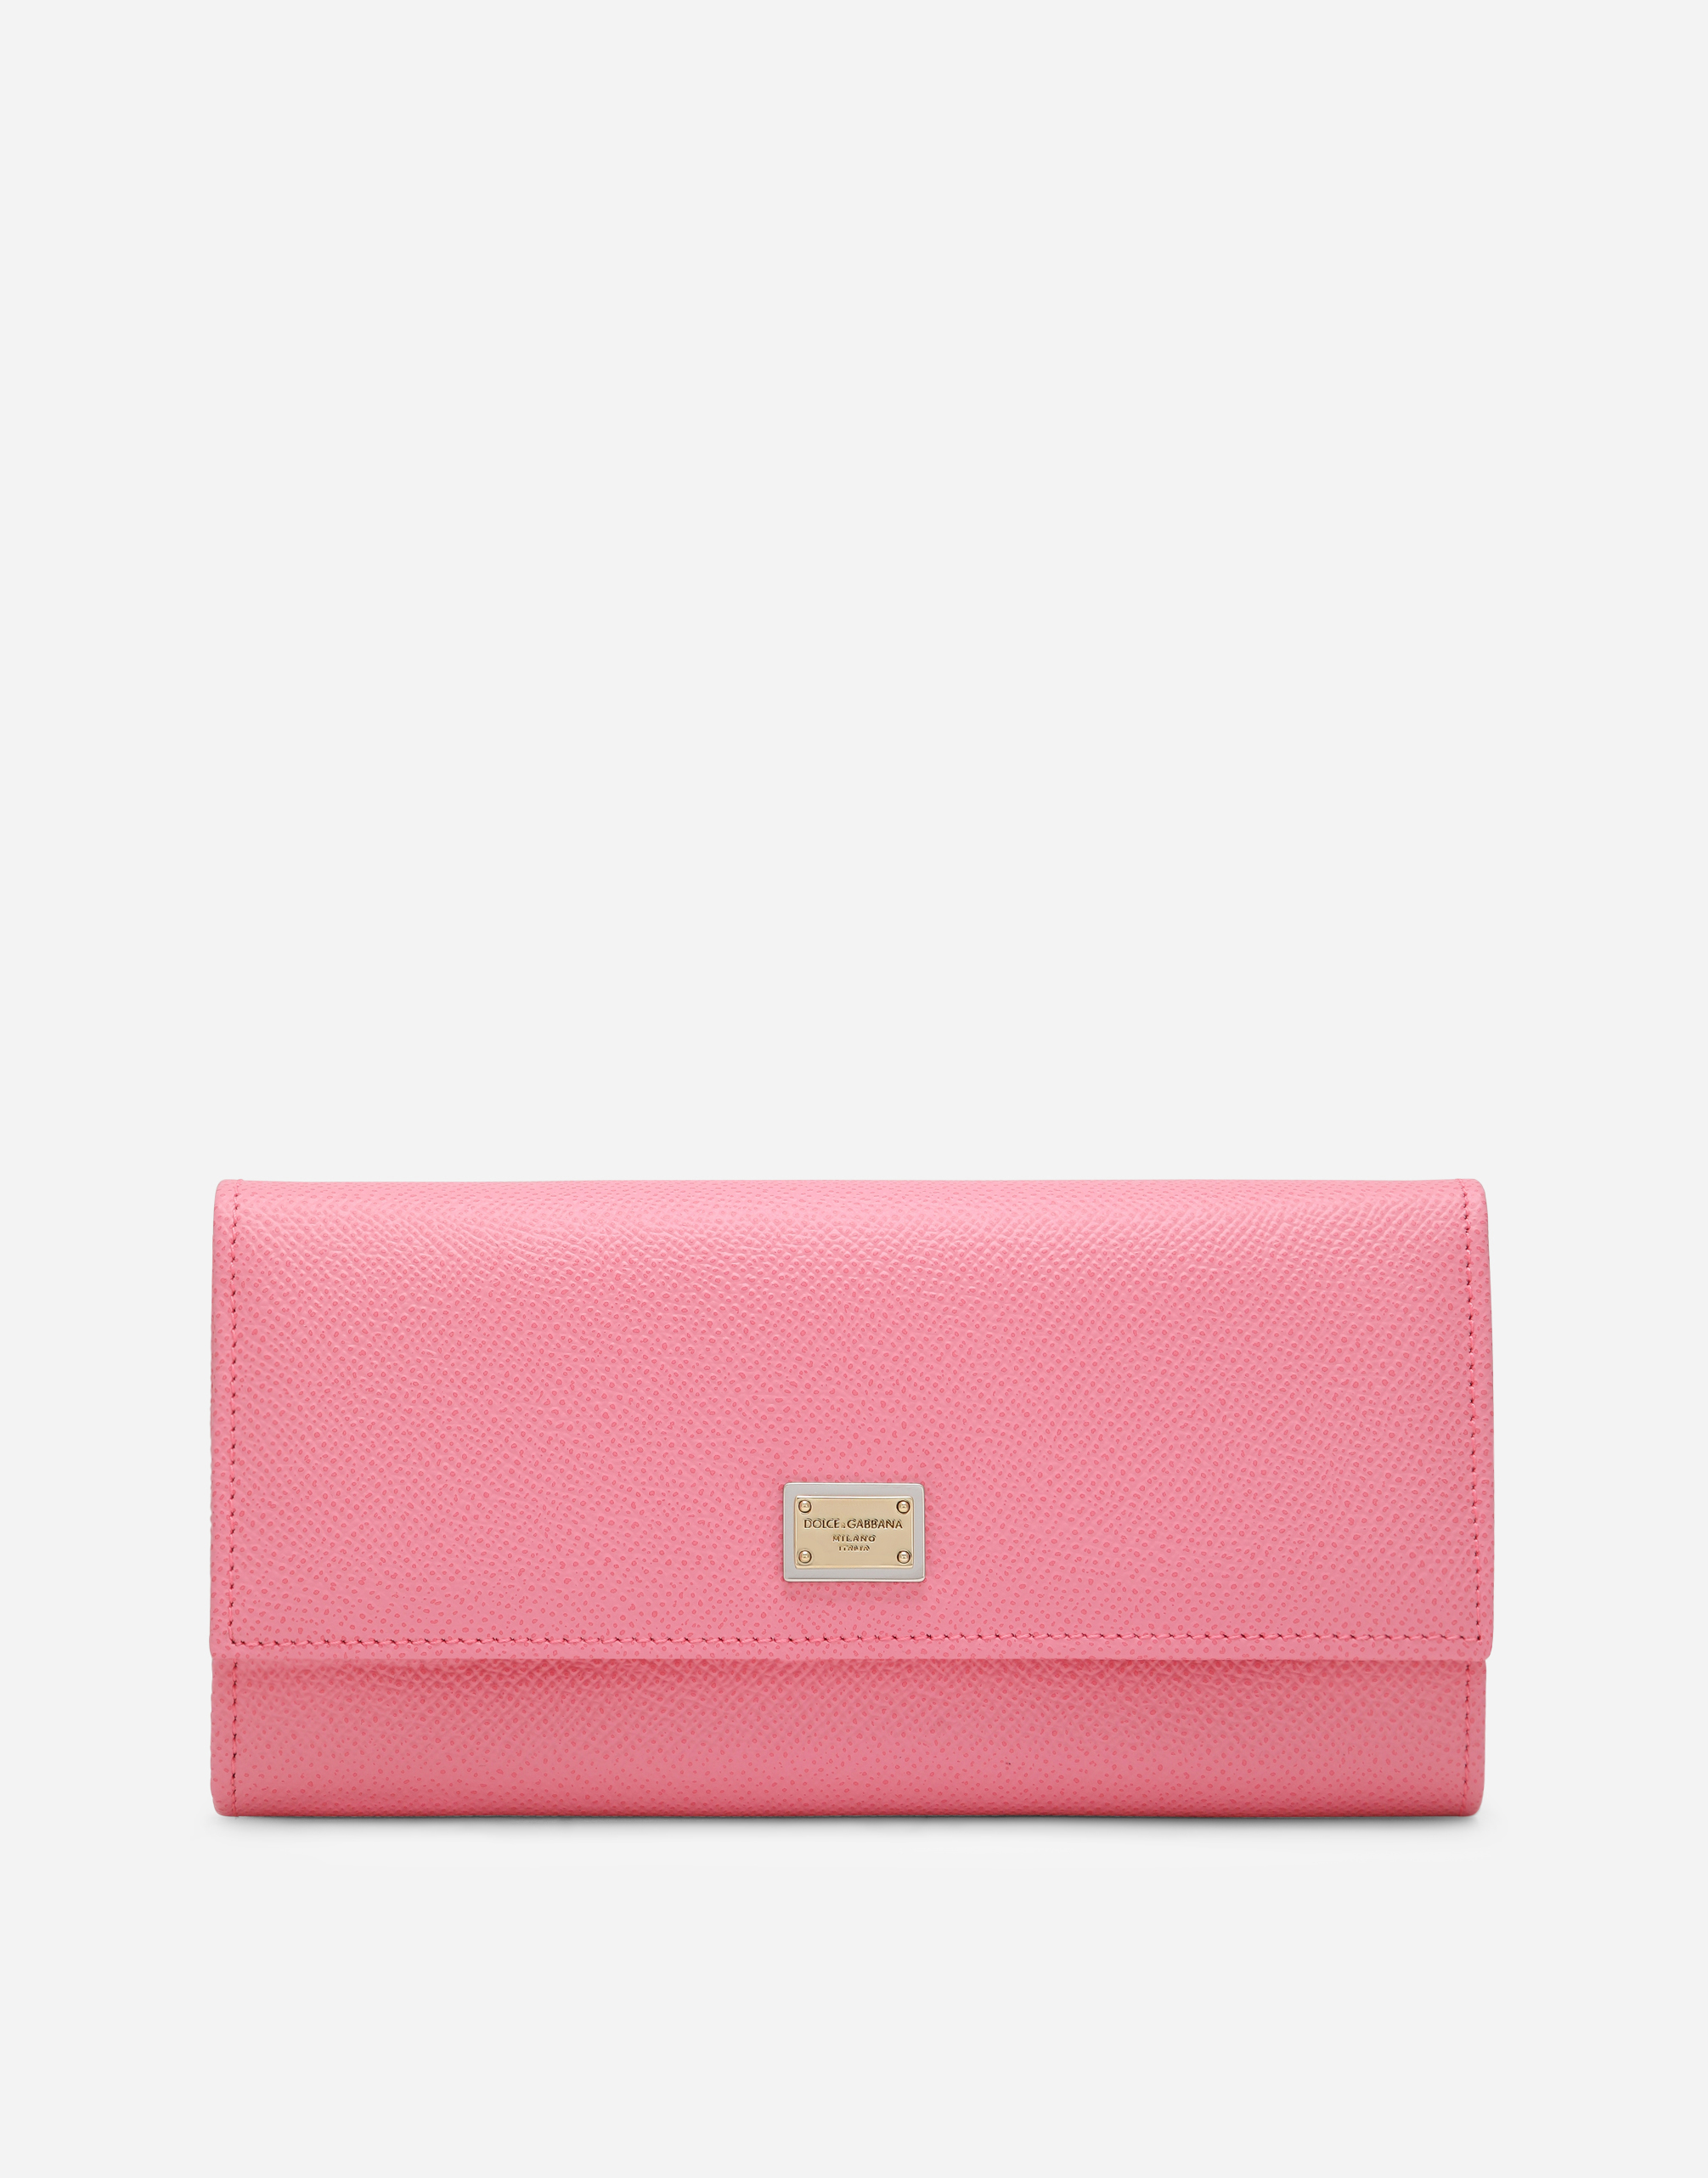 Dauphine calfskin wallet with branded tag in Pink